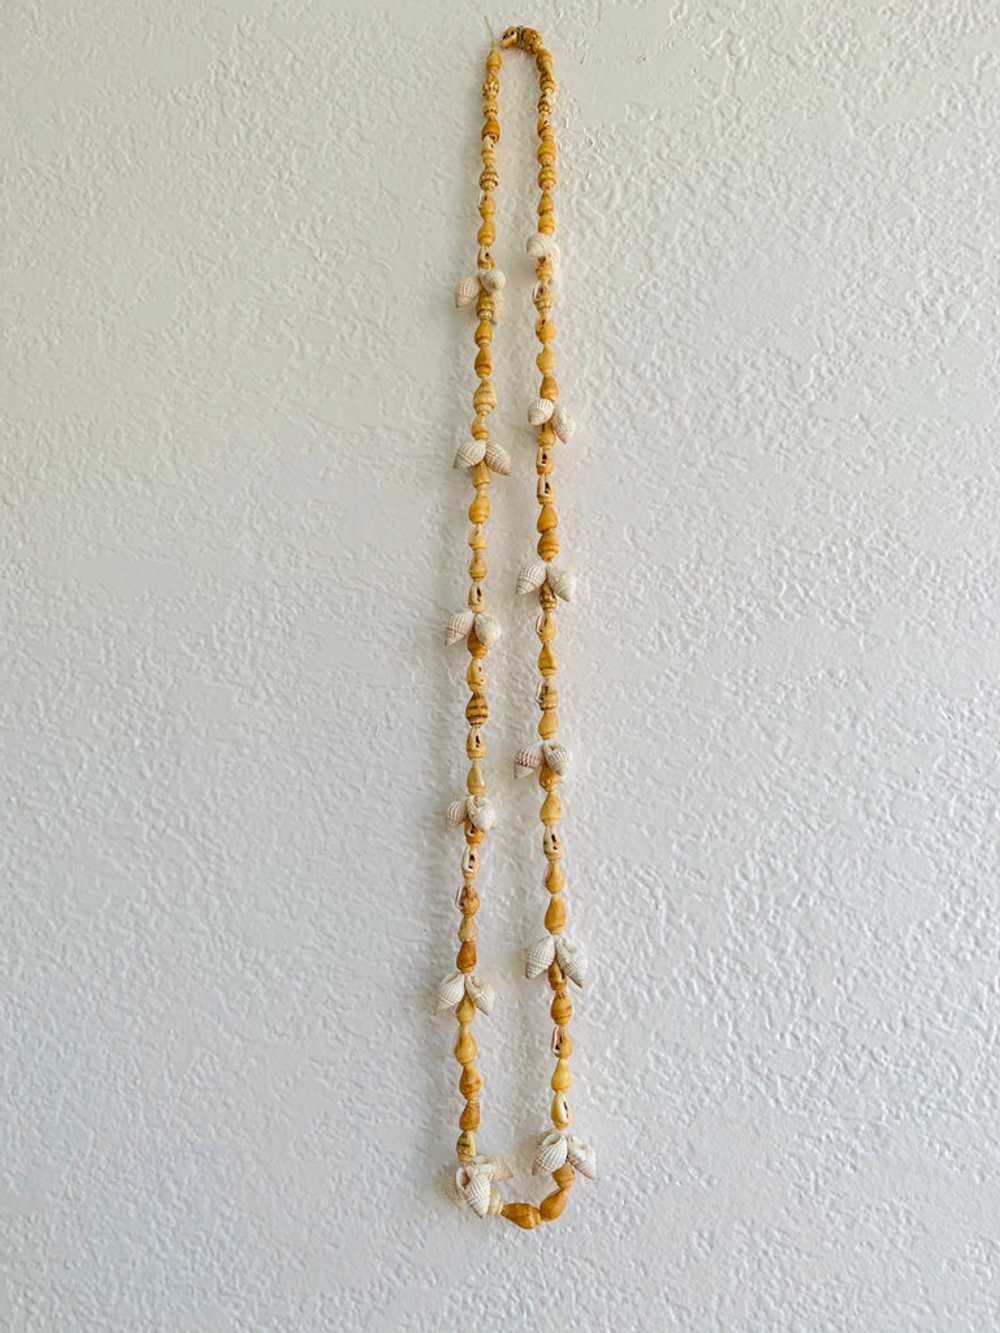 1970’s Beaded Shell Necklace - image 2